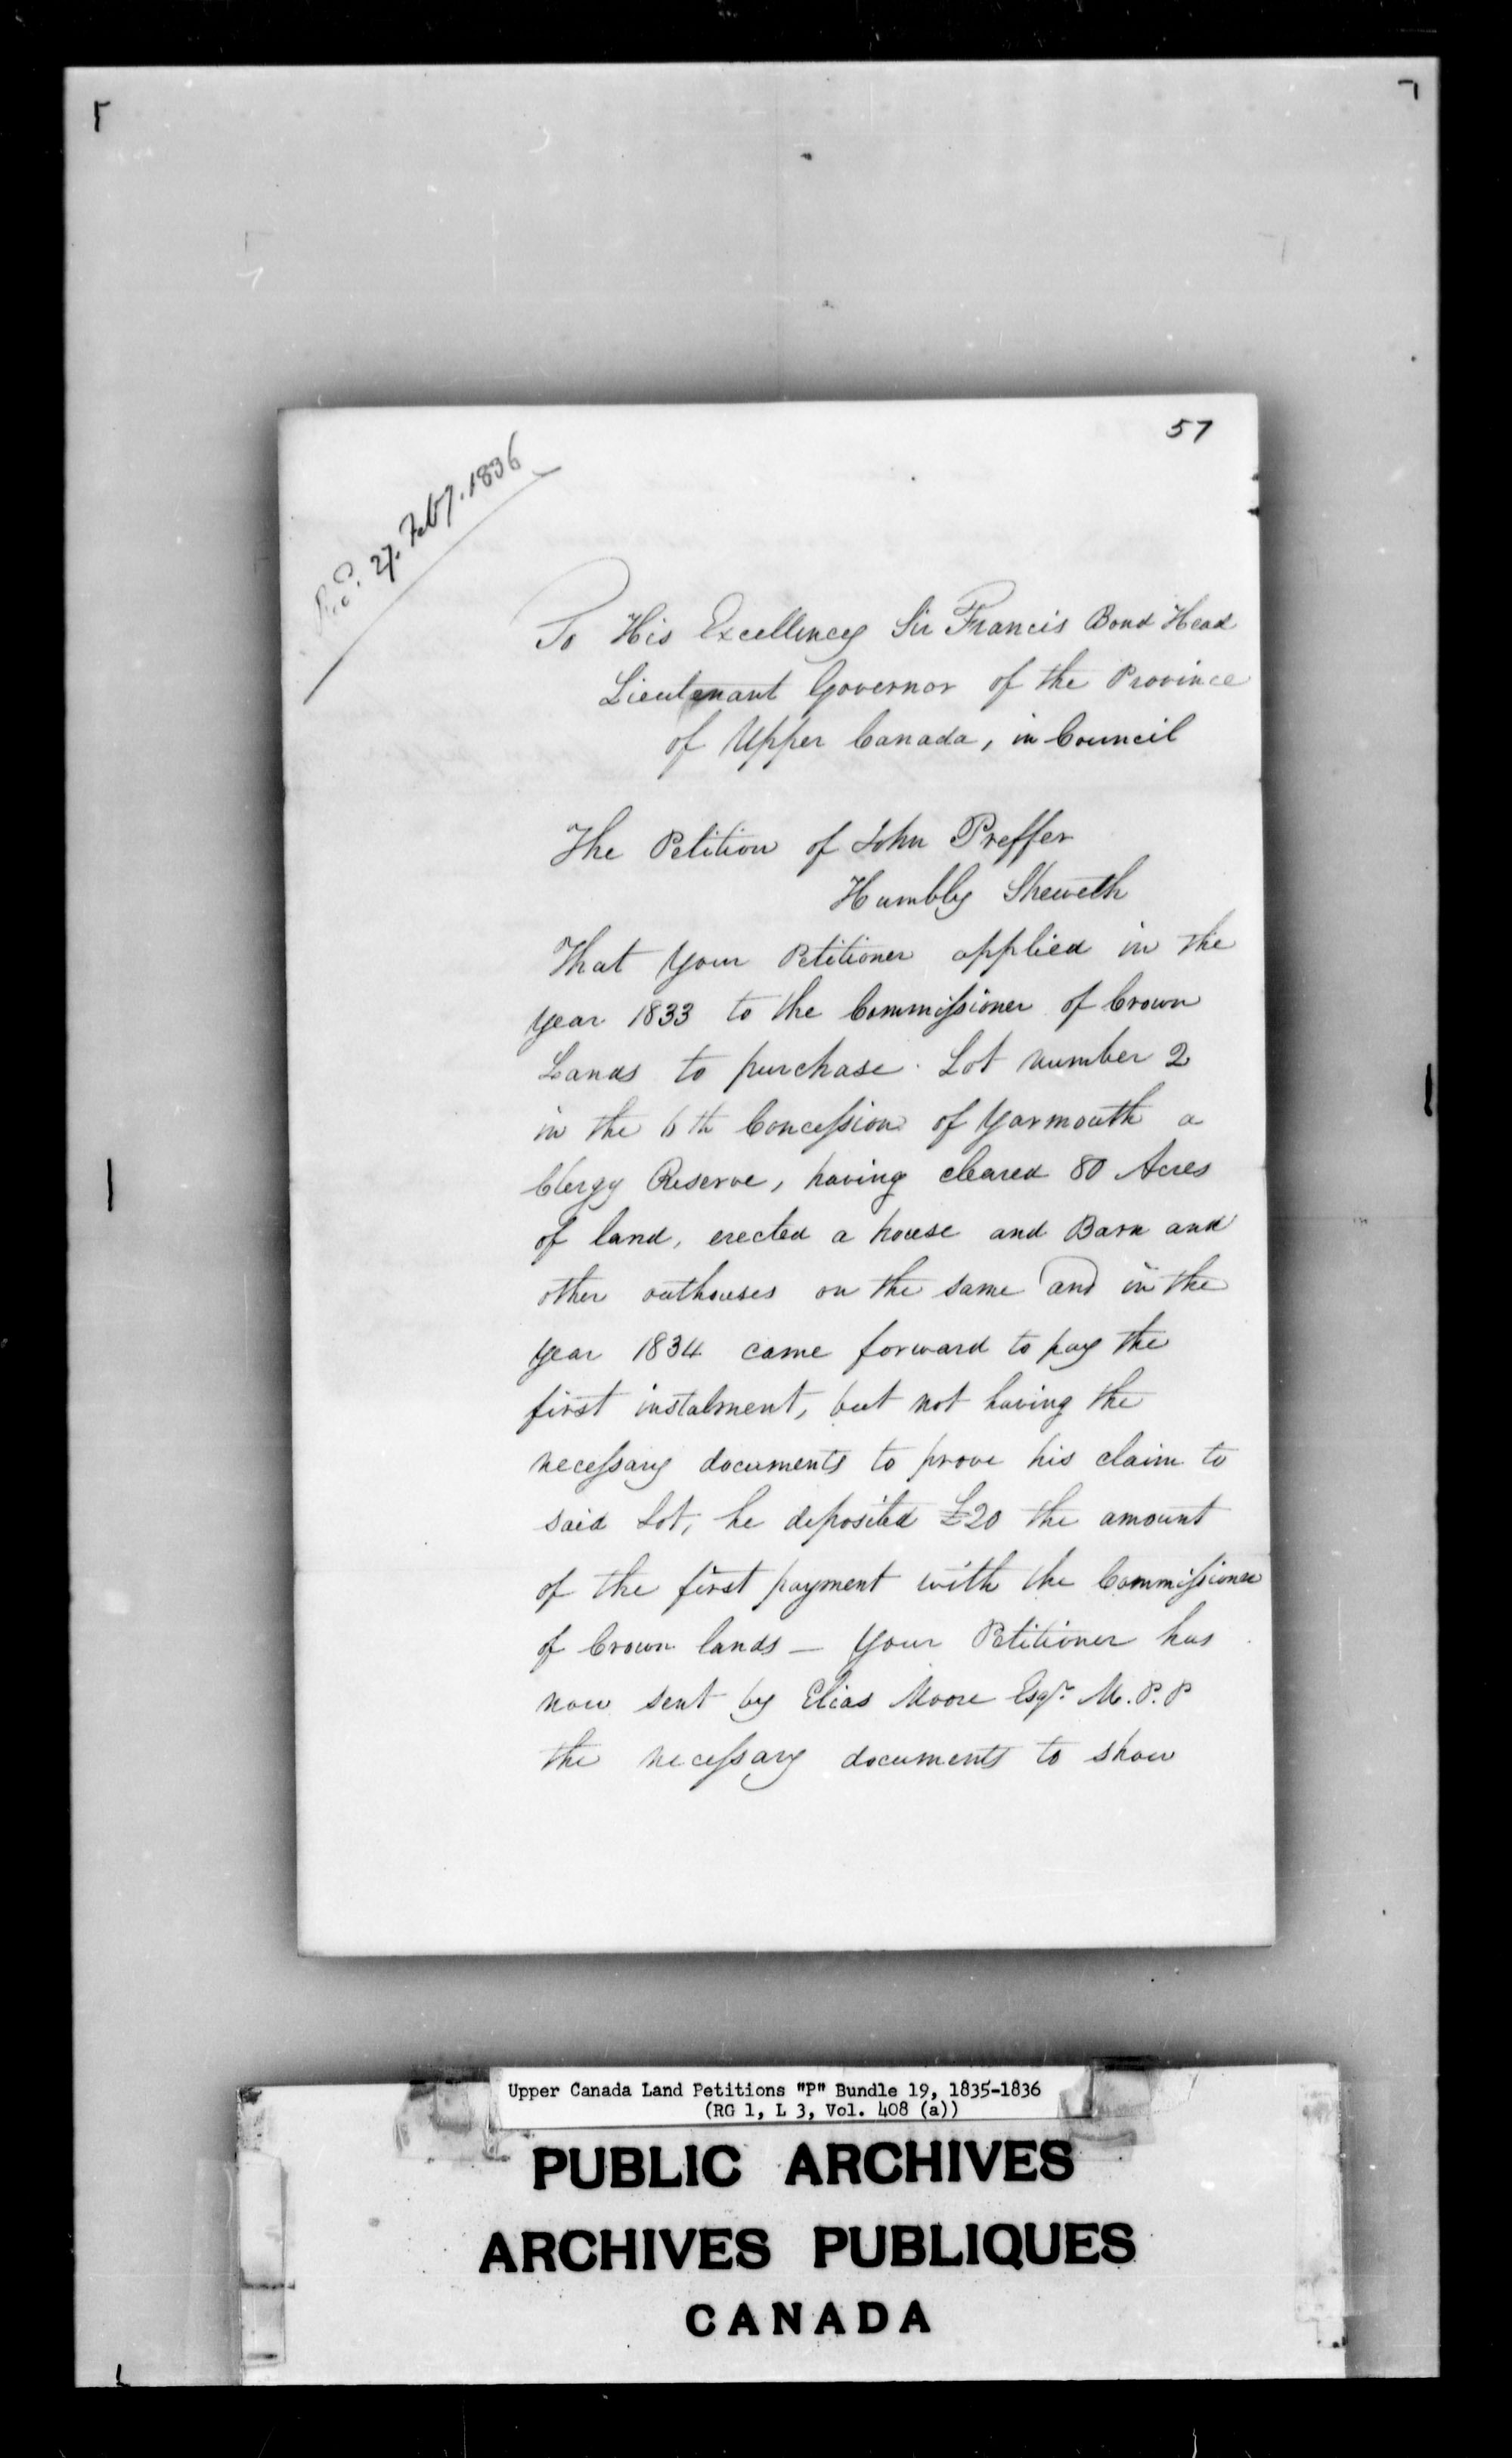 Title: Upper Canada Land Petitions (1763-1865) - Mikan Number: 205131 - Microform: c-2731a